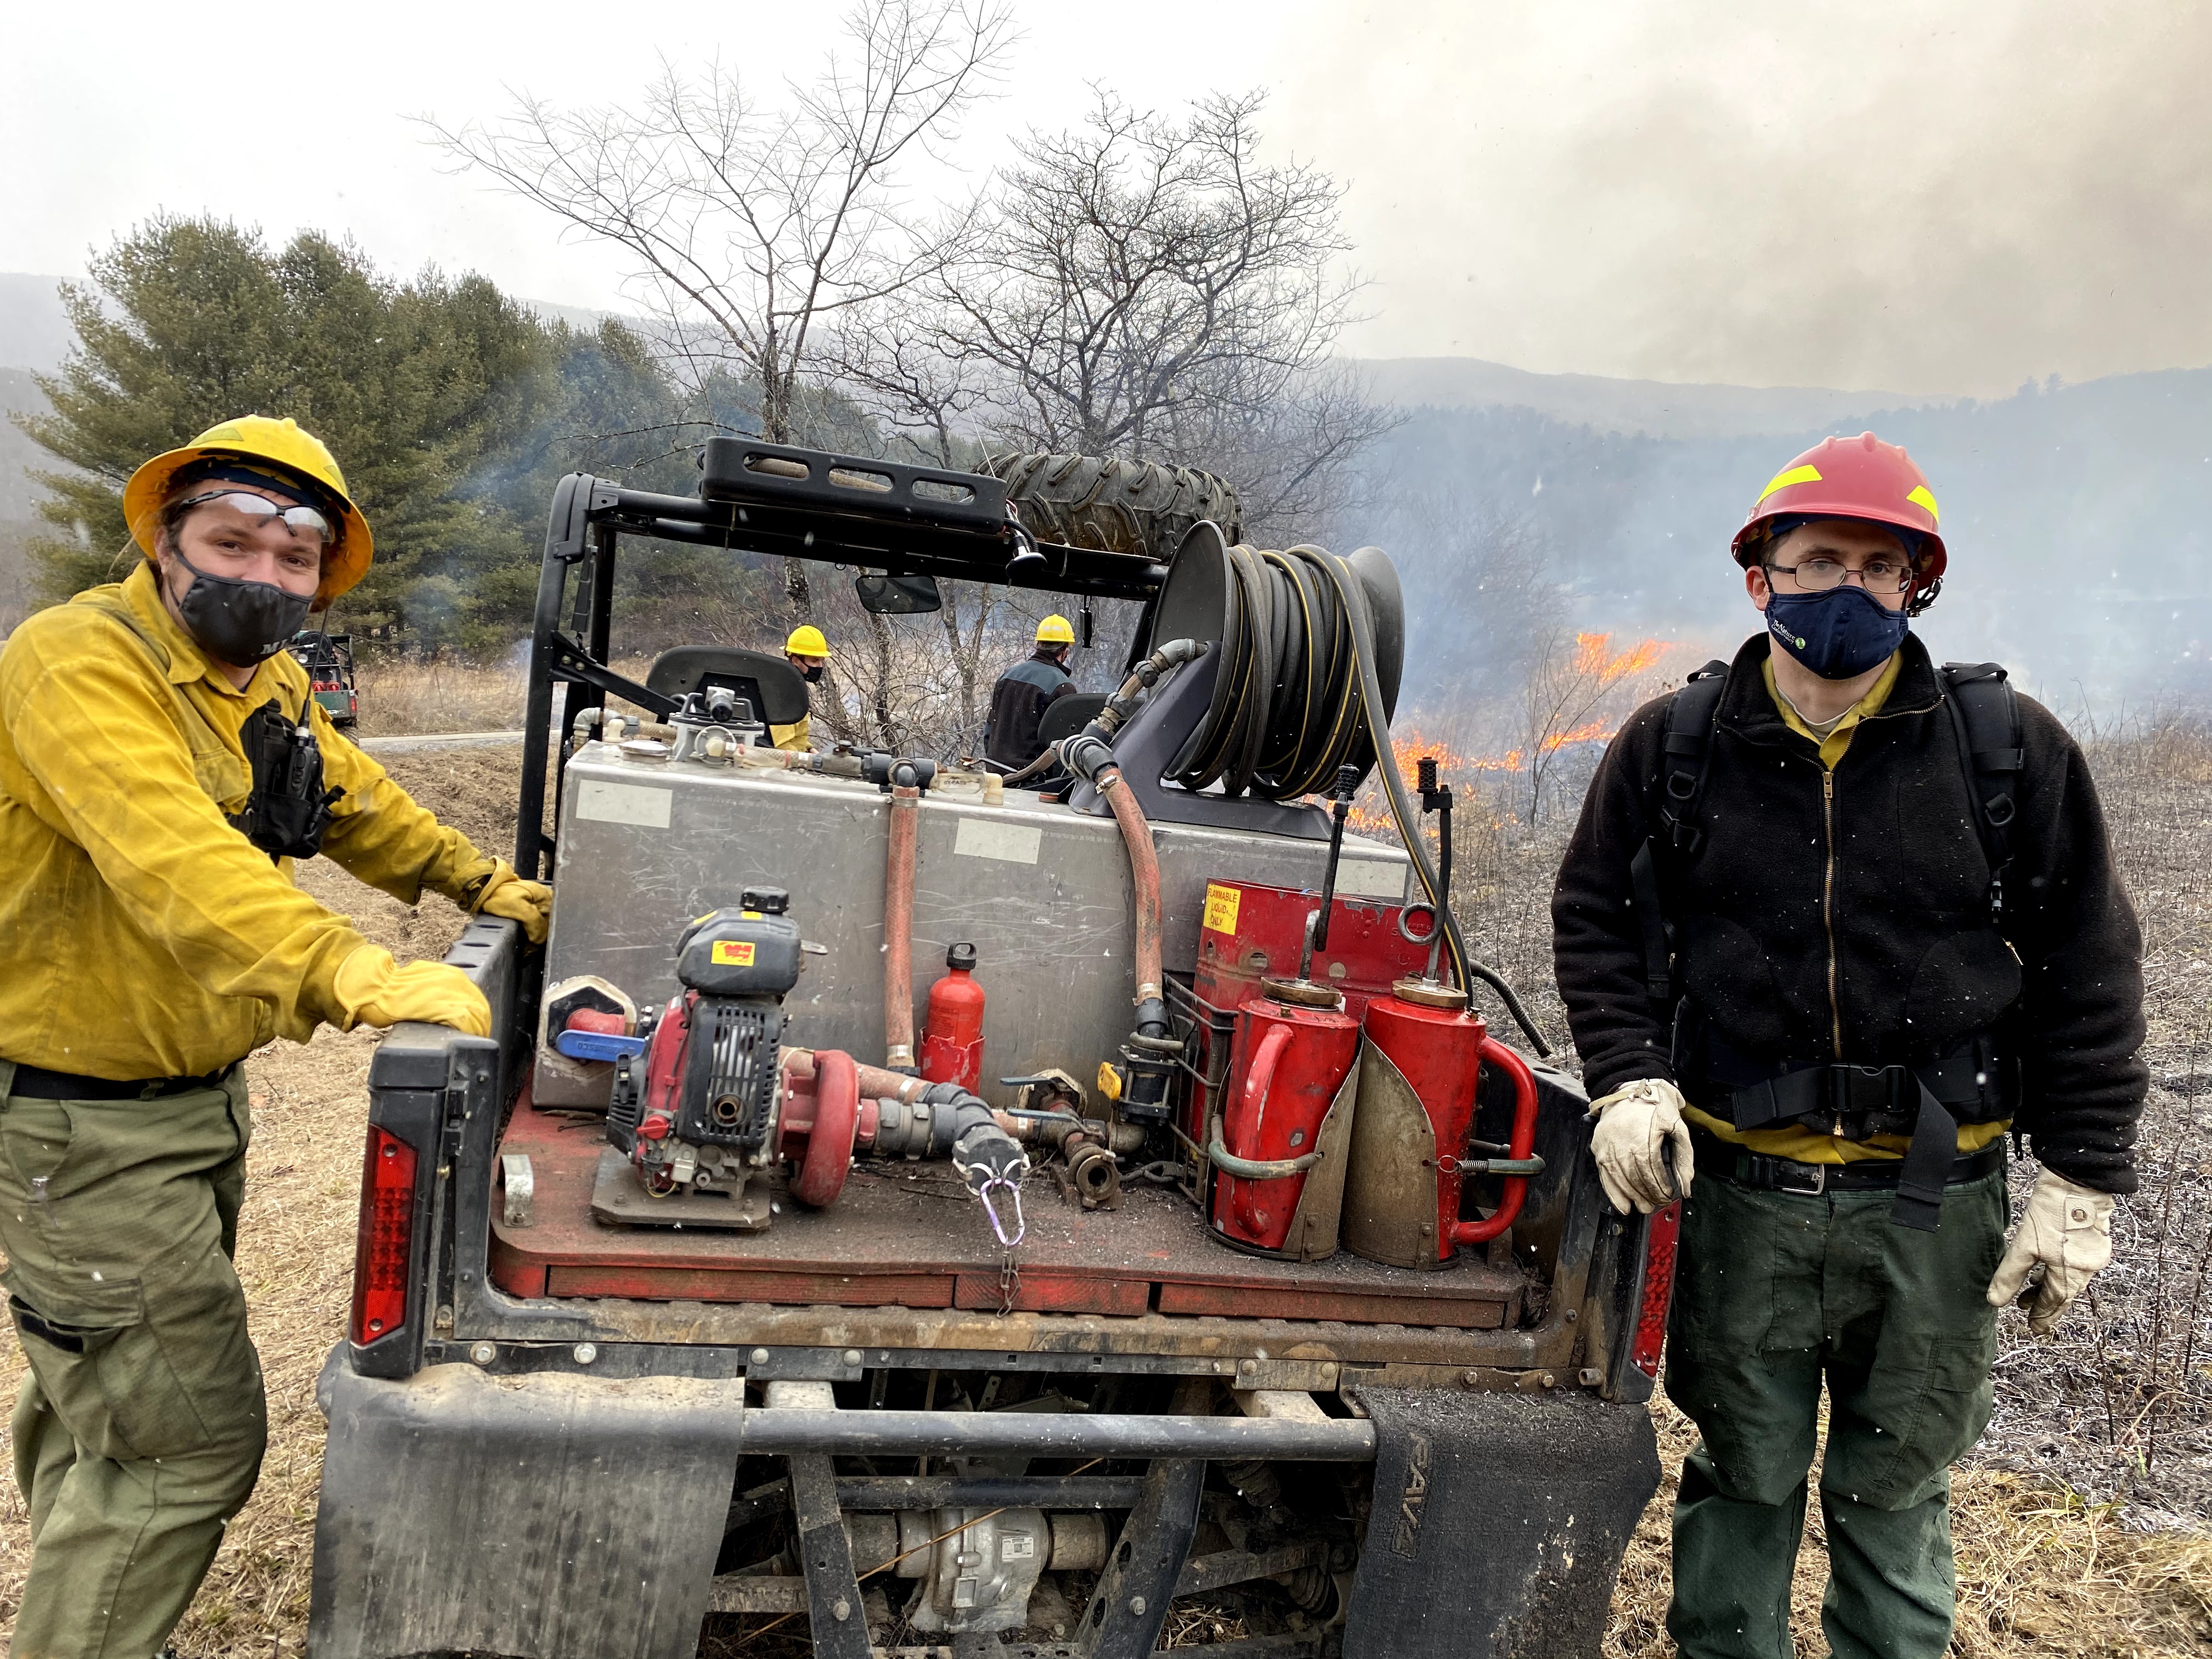 Two men wearing fire gear stand on either side of a small fire engine. Behind them two men monitor a fire during a controlled burn. The air is filled with flecks of either snow or ash.